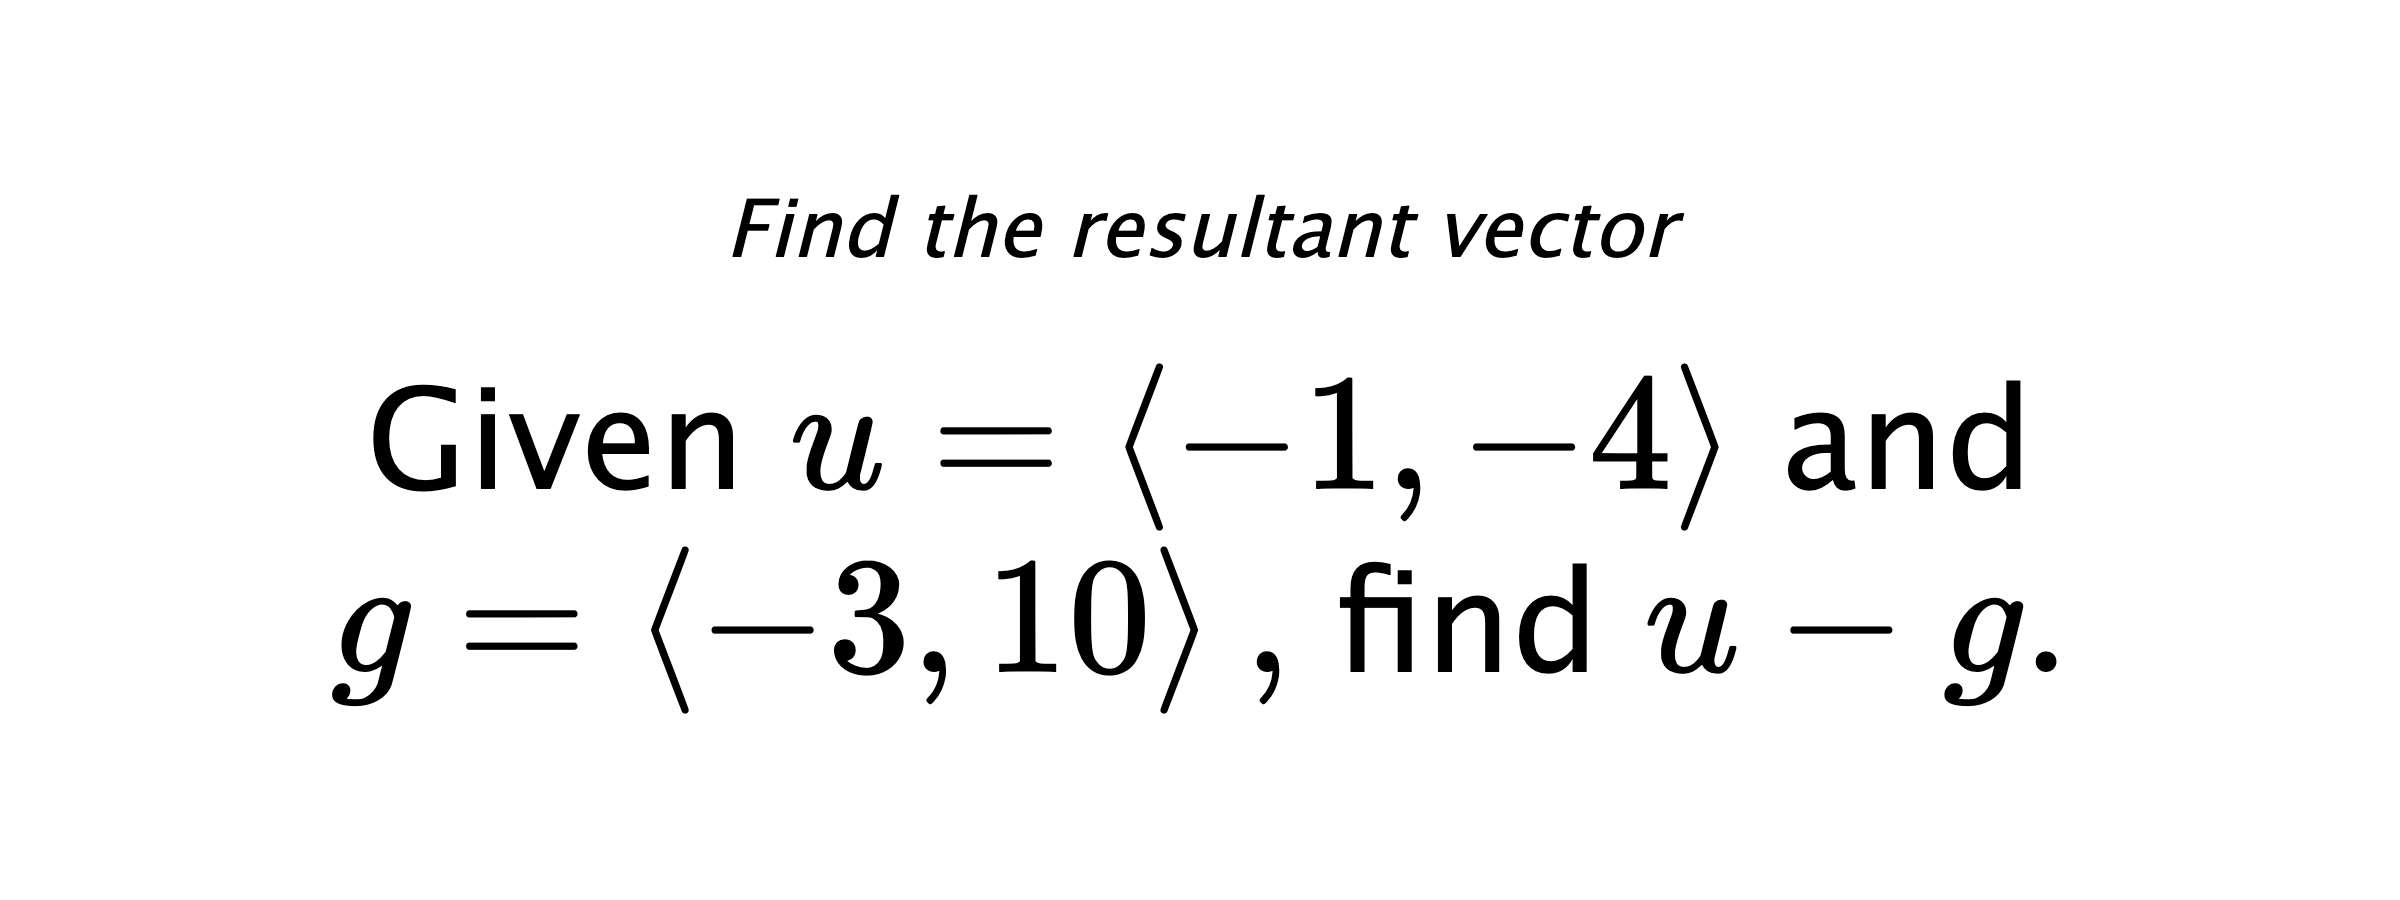 Find the resultant vector Given $ u = \left< -1,-4 \right> $ and $ g = \left< -3,10 \right> ,$ find $ u-g .$